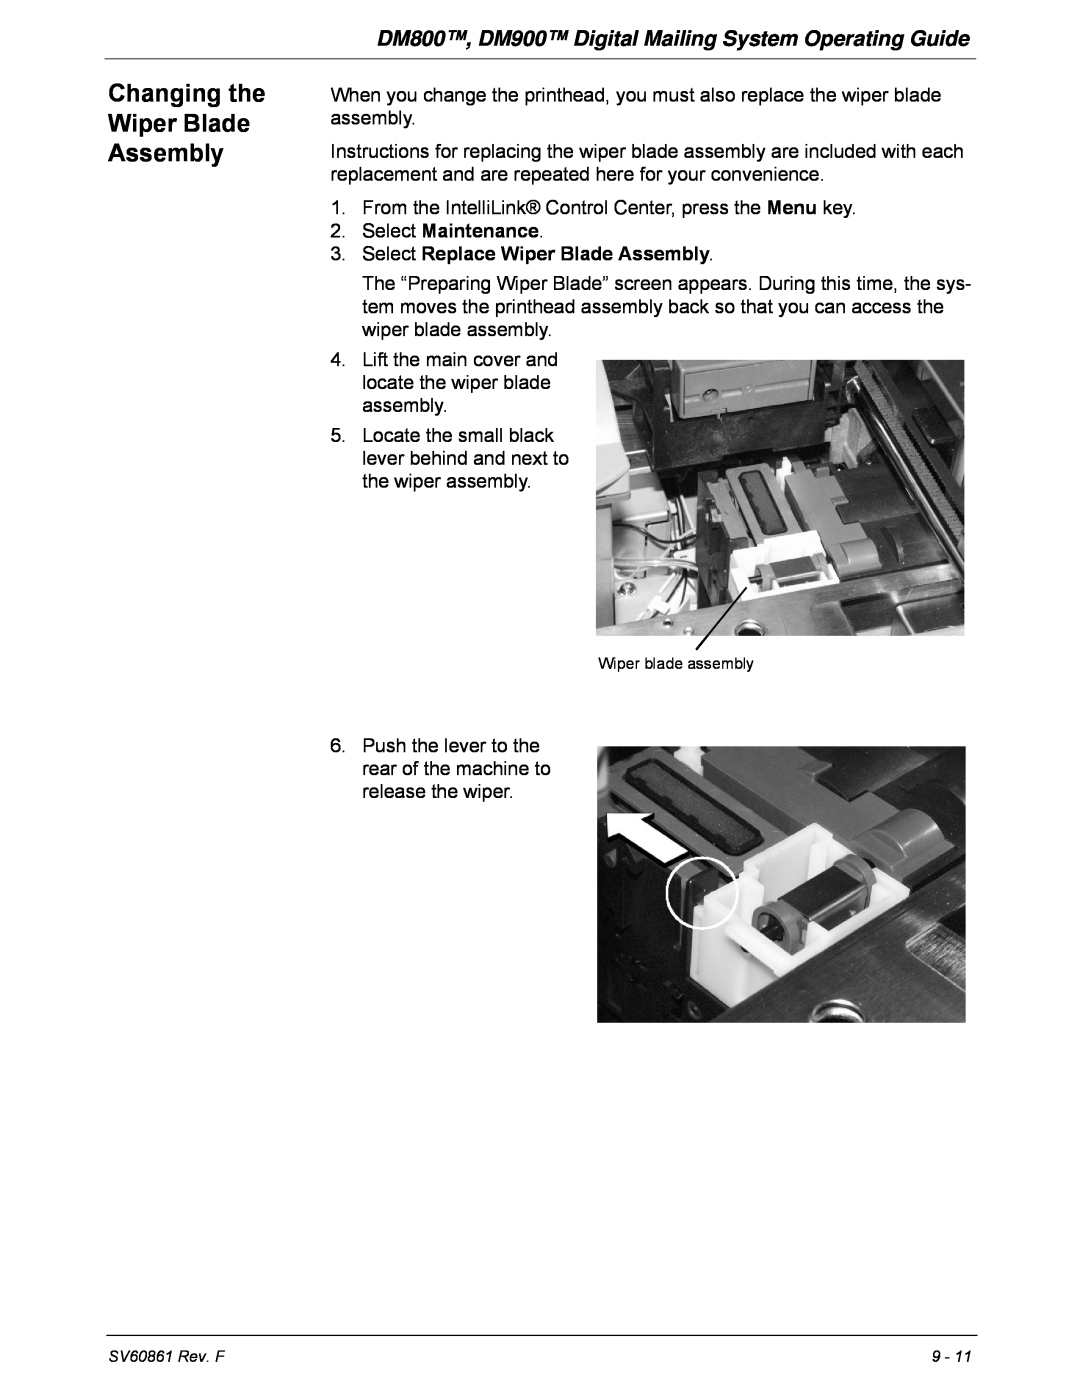 Pitney Bowes manual Changing the Wiper Blade Assembly, DM800, DM900 Digital Mailing System Operating Guide 